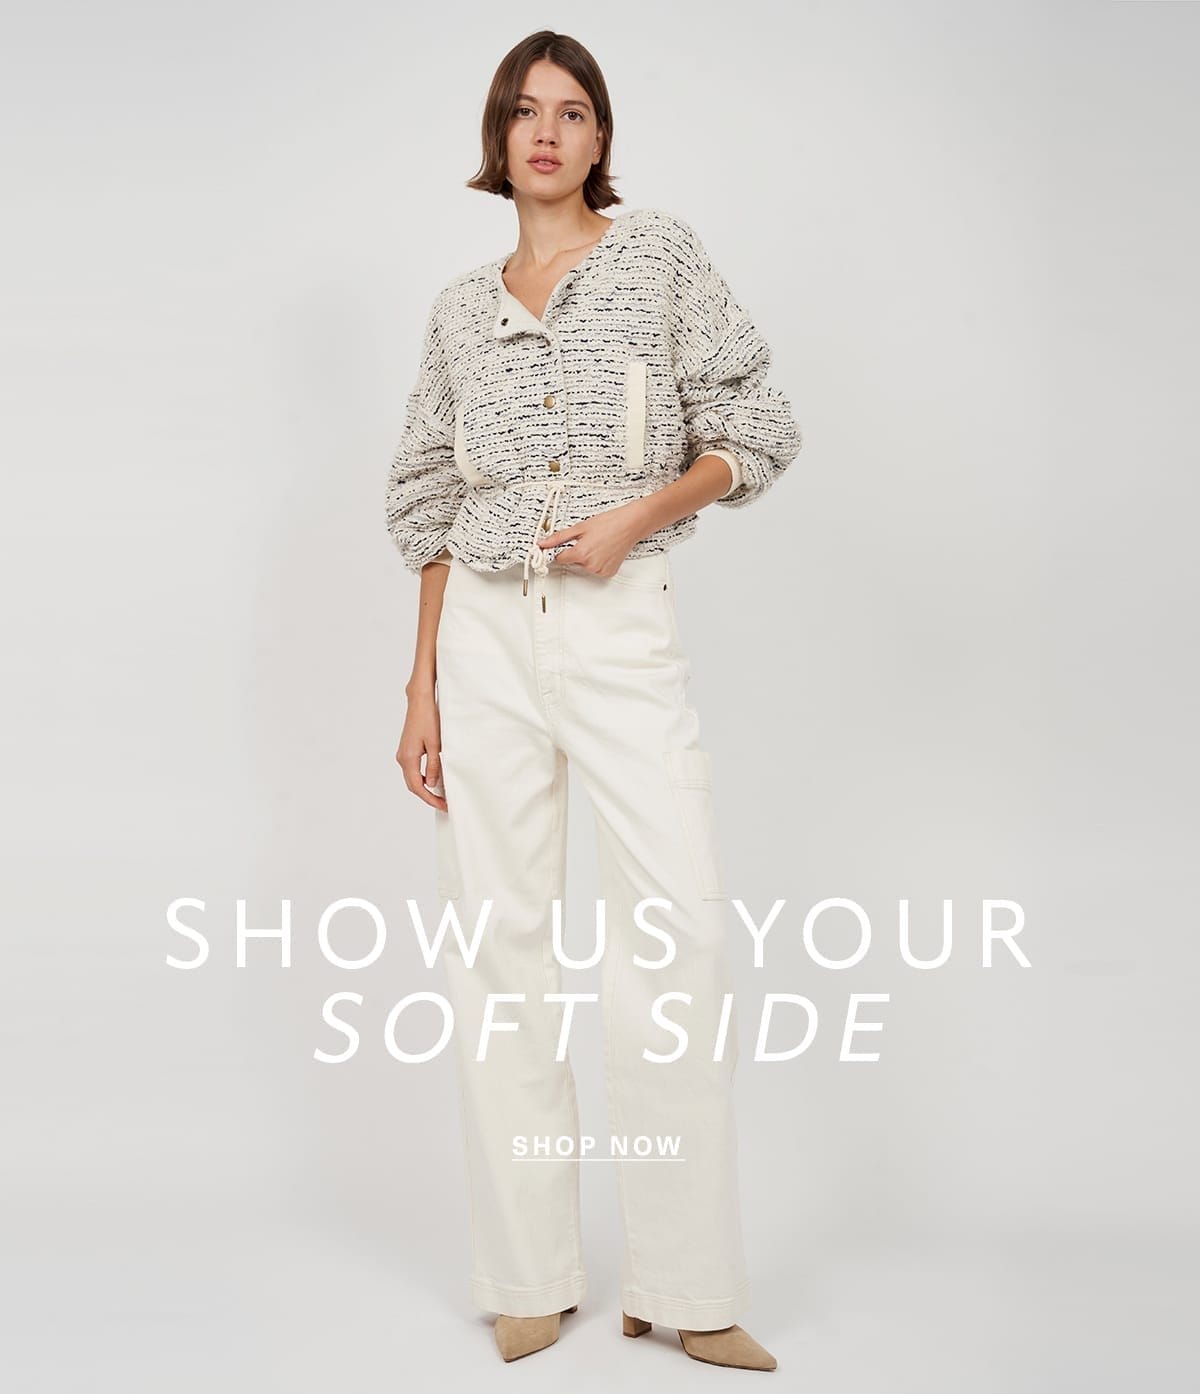 SHOW US YOUR SOFT SIDE SHOP NOW